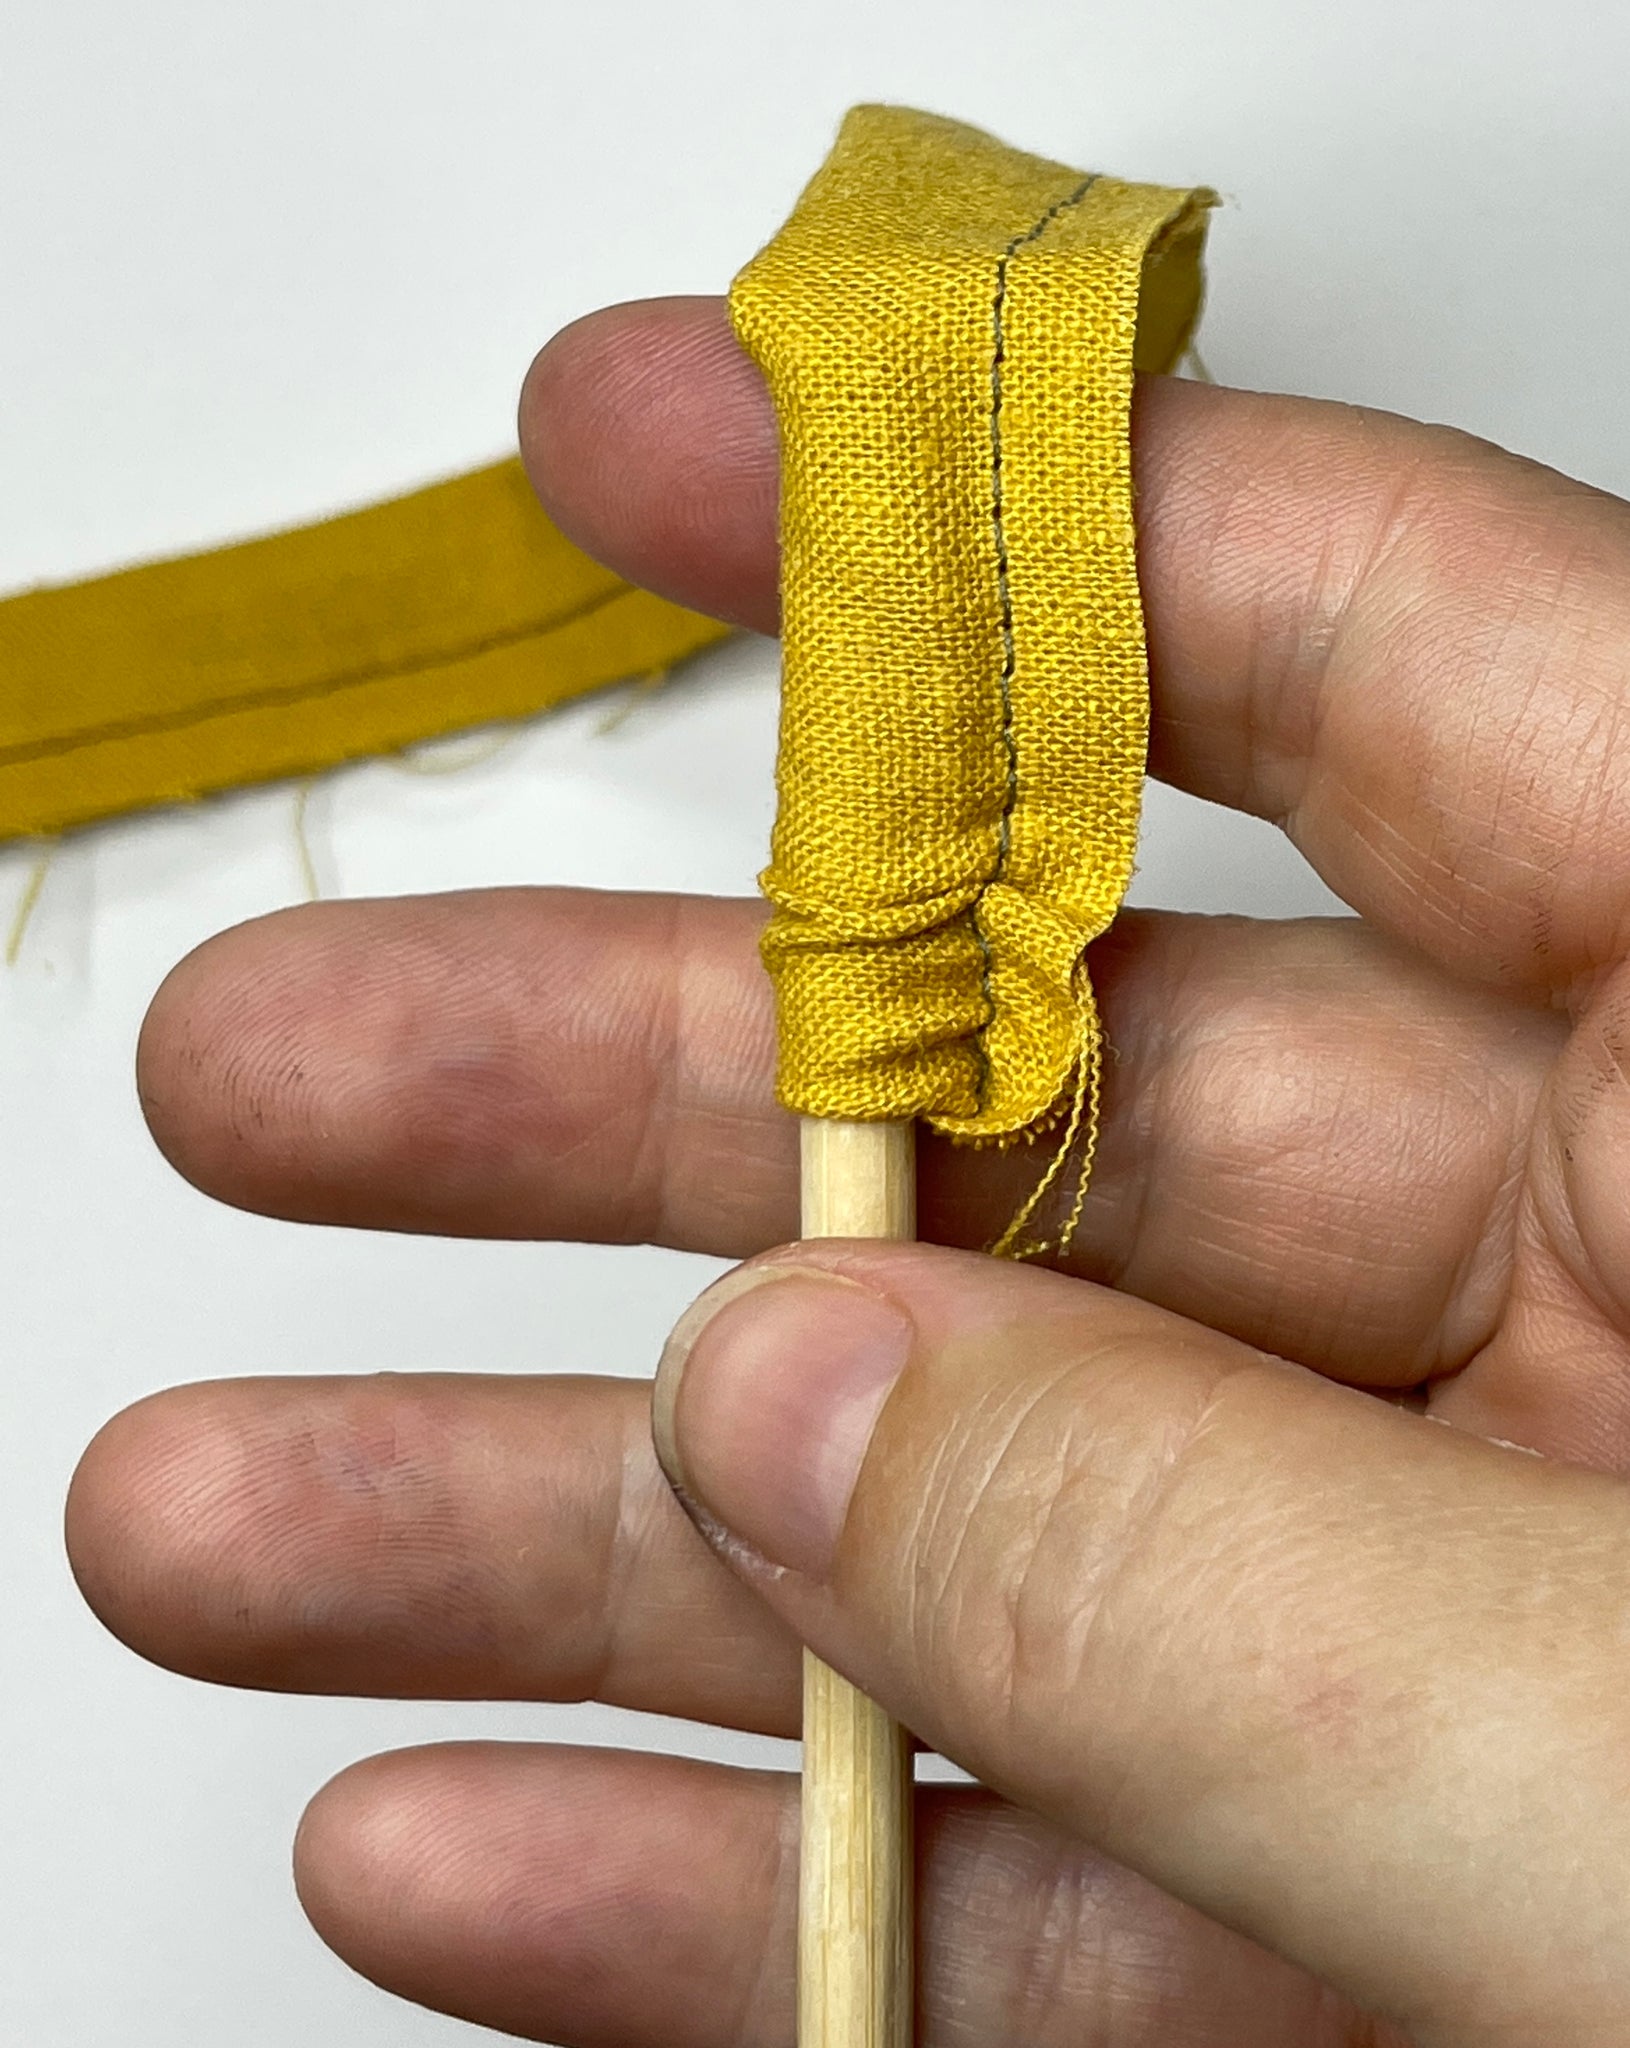 Turning the yellow waist tie right side out on a chopstick